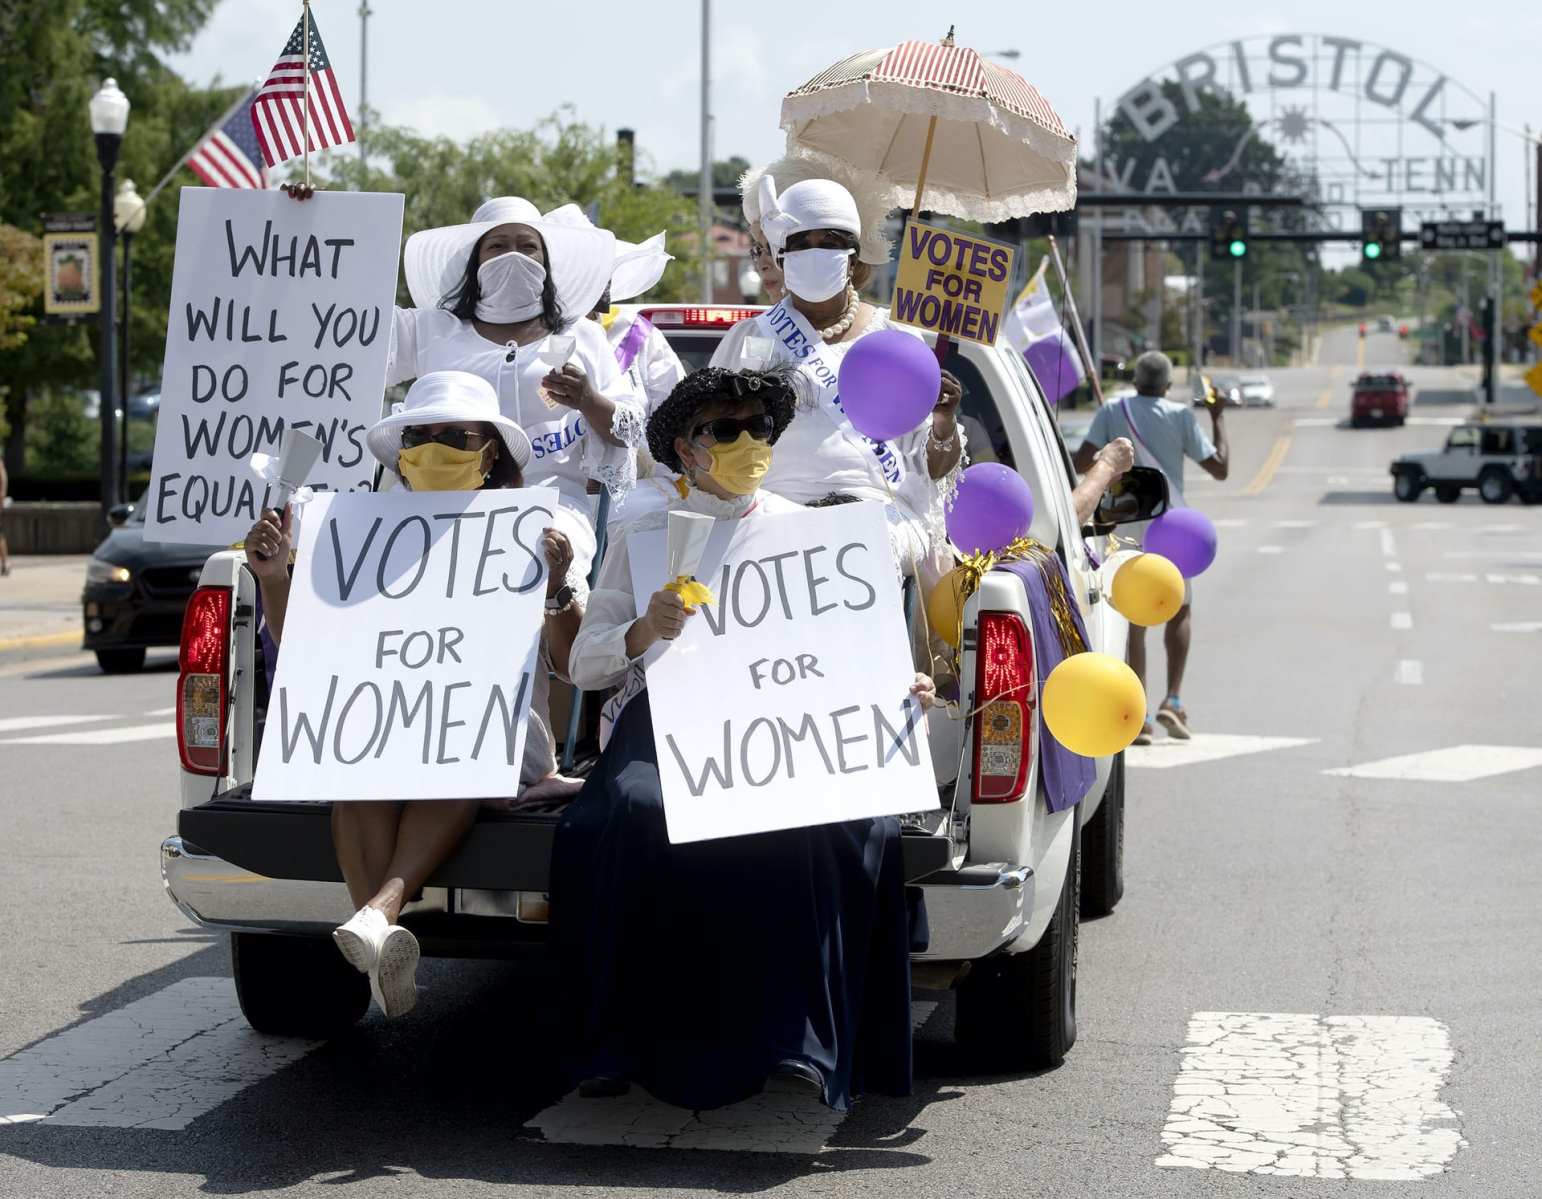 Women in all white sitting in the back of a truck with "votes for women" signs.